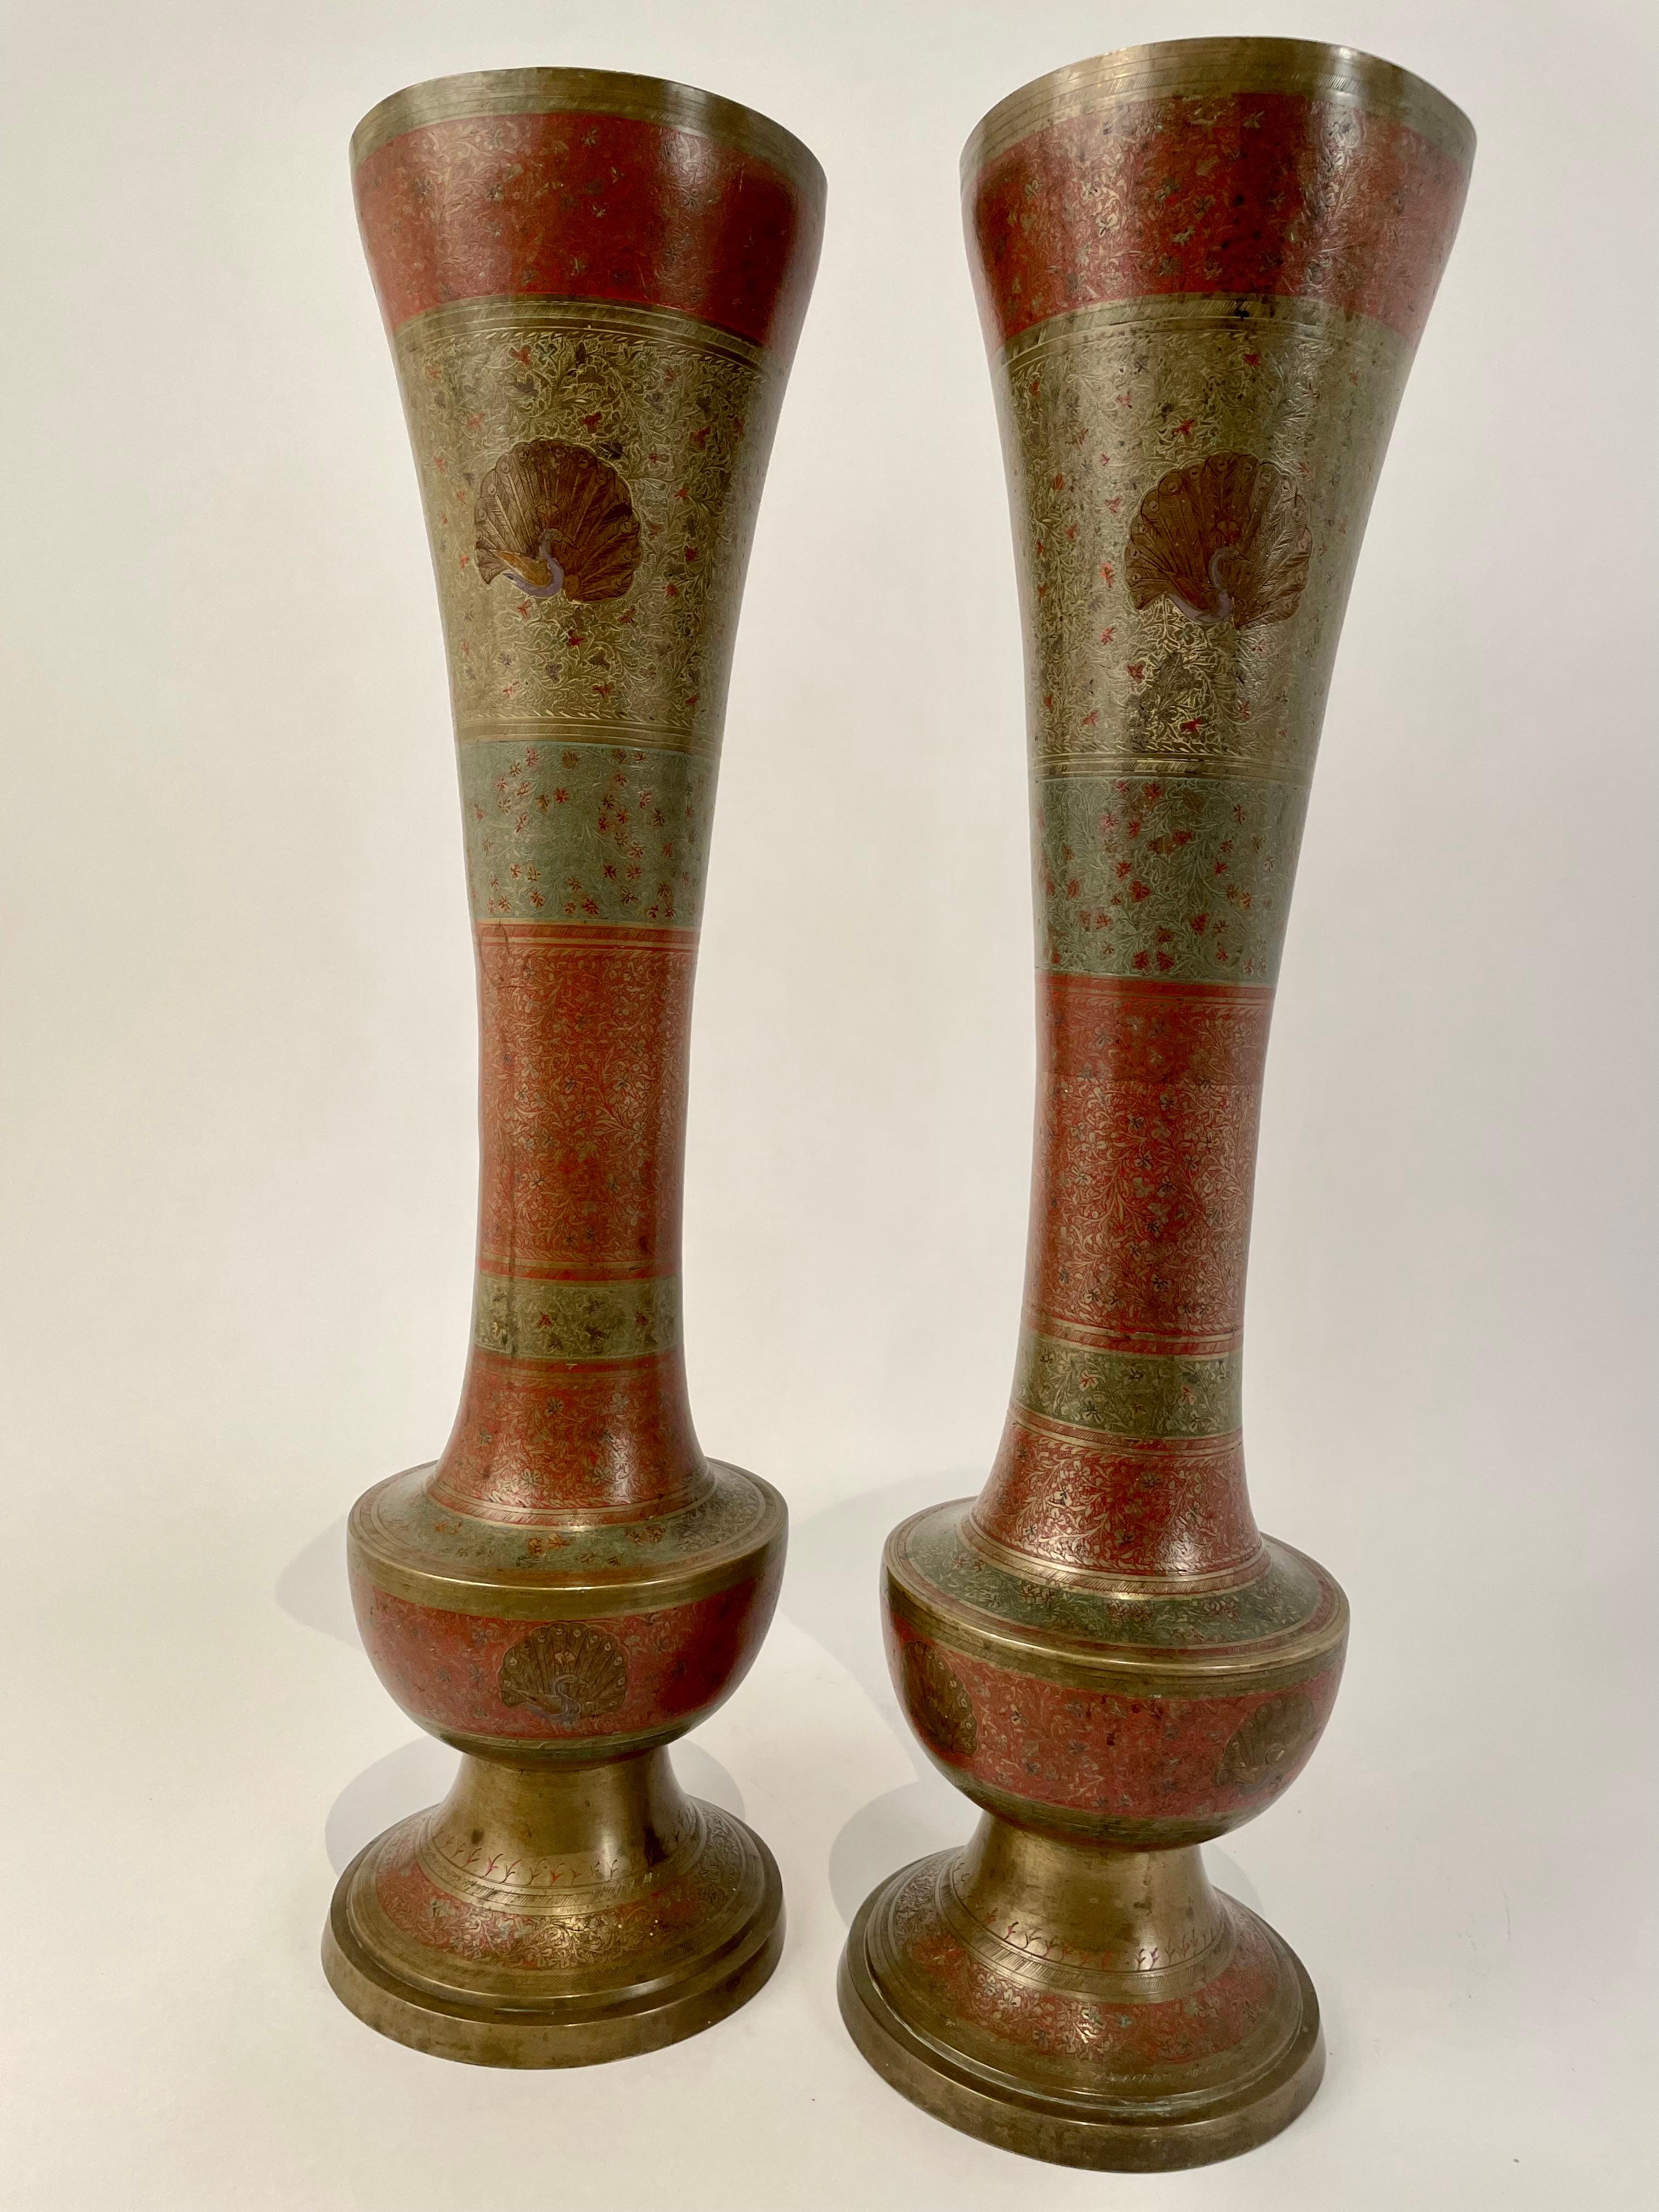 Impressive and very cool large scale flute form brass vases with intricate etched designs covering the surface and peacock decoration. Colored in red and green in a manner similar to cloisonne, with a lovely old patina to the brass. At almost 2 feet